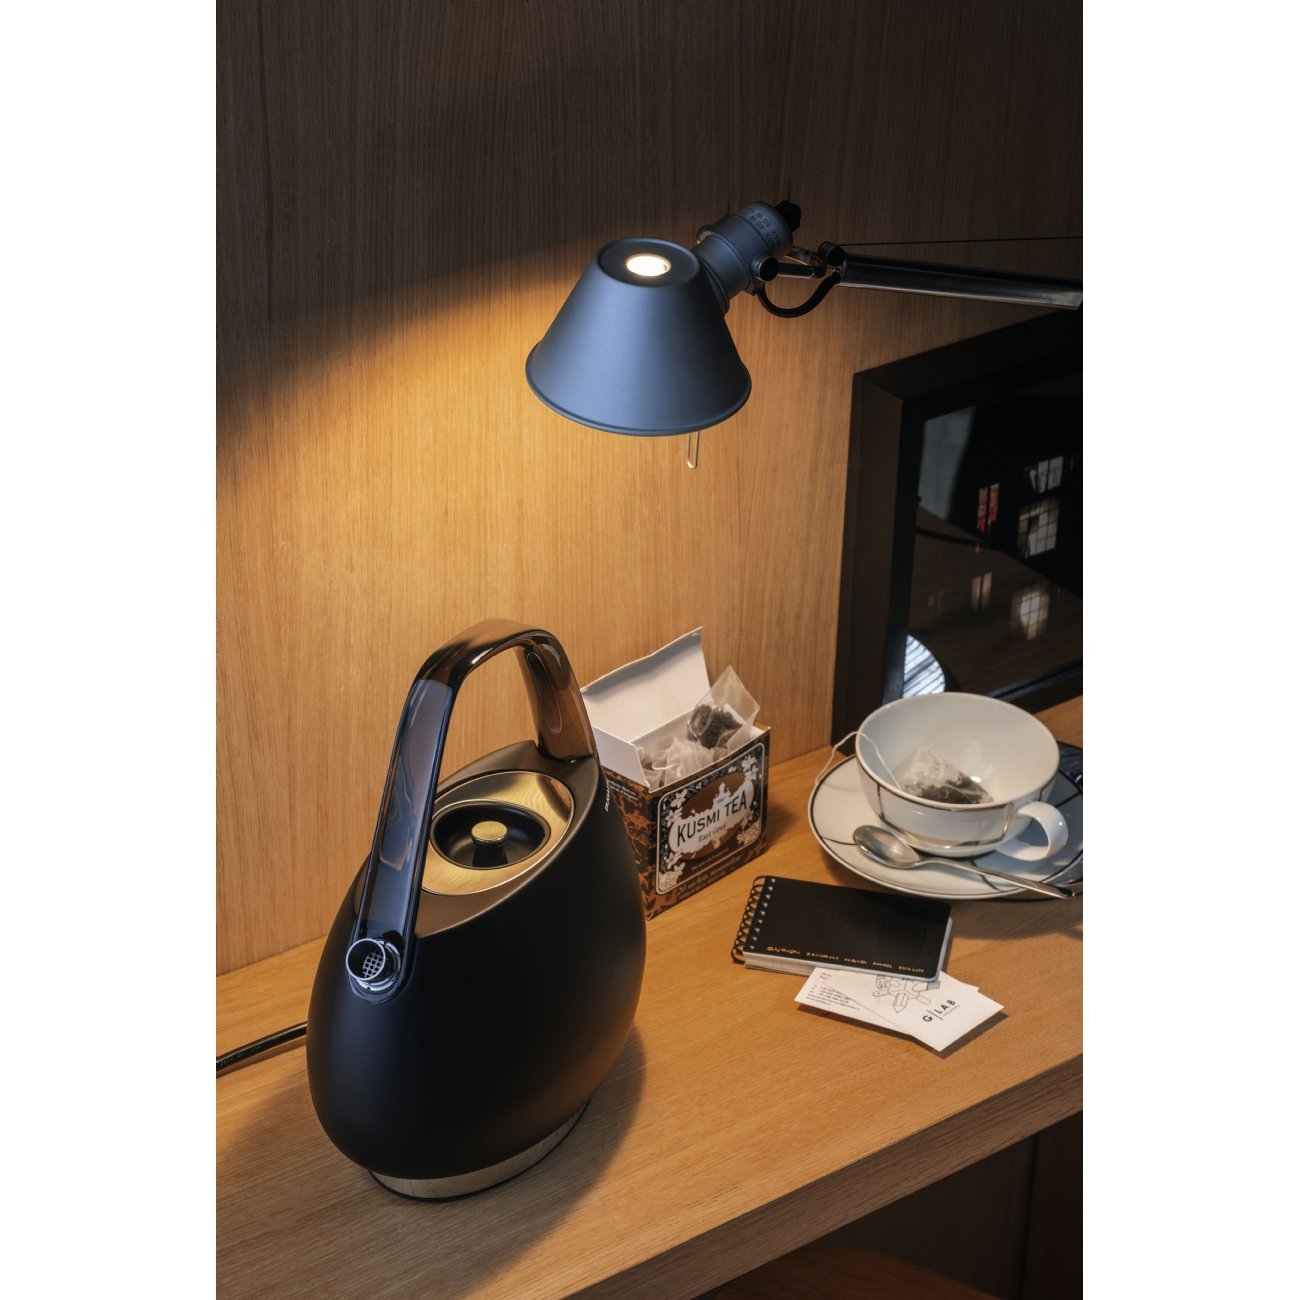 BUGATTI Jackie electric kettle with limescale filter